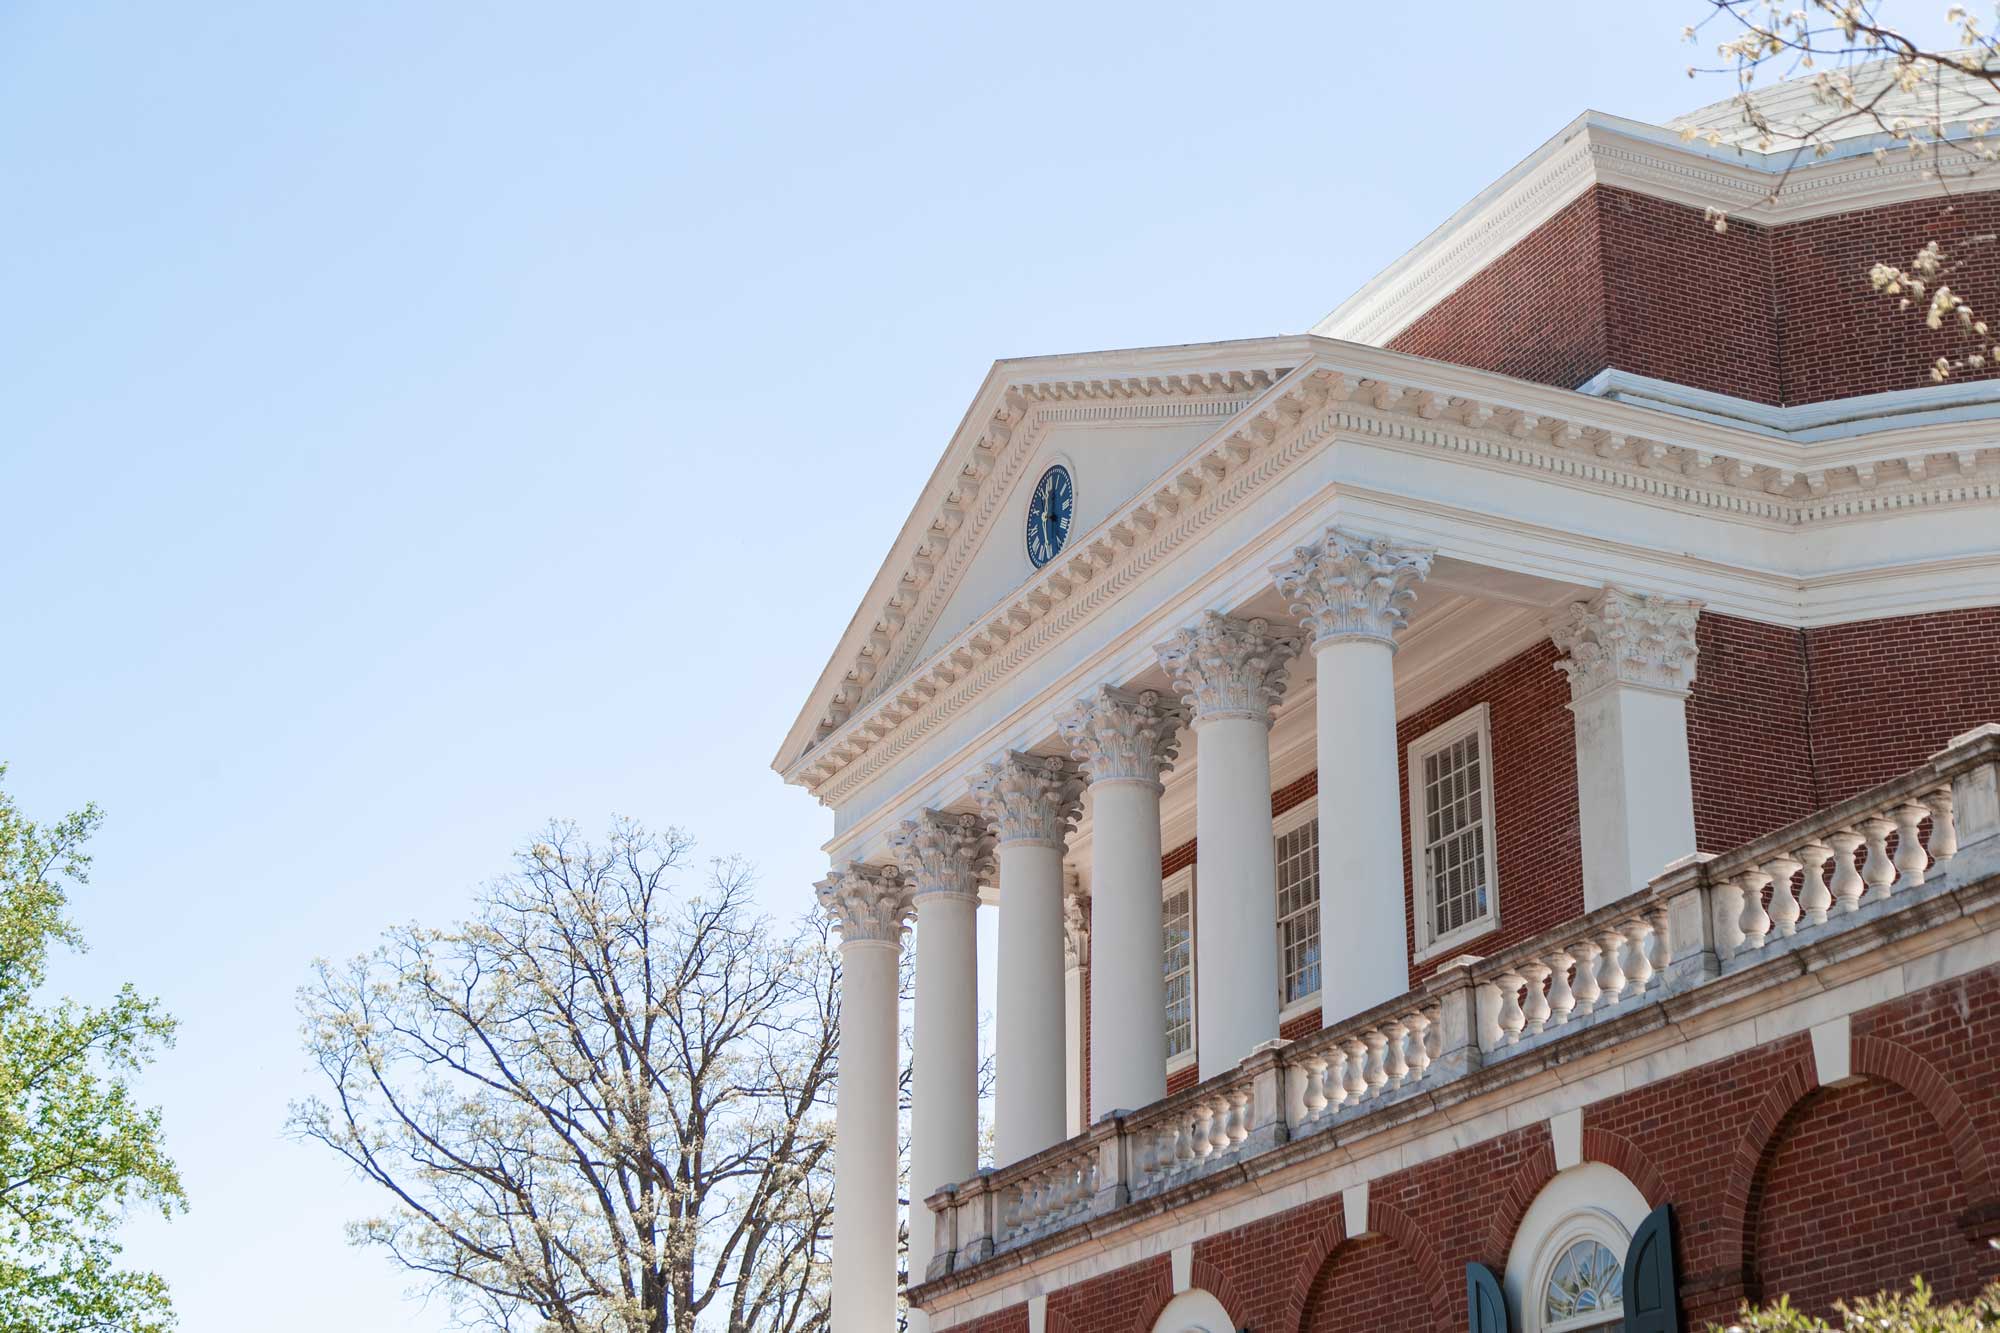 News in Brief: Jefferson Scholars Foundation Honors 5 UVA Faculty Members